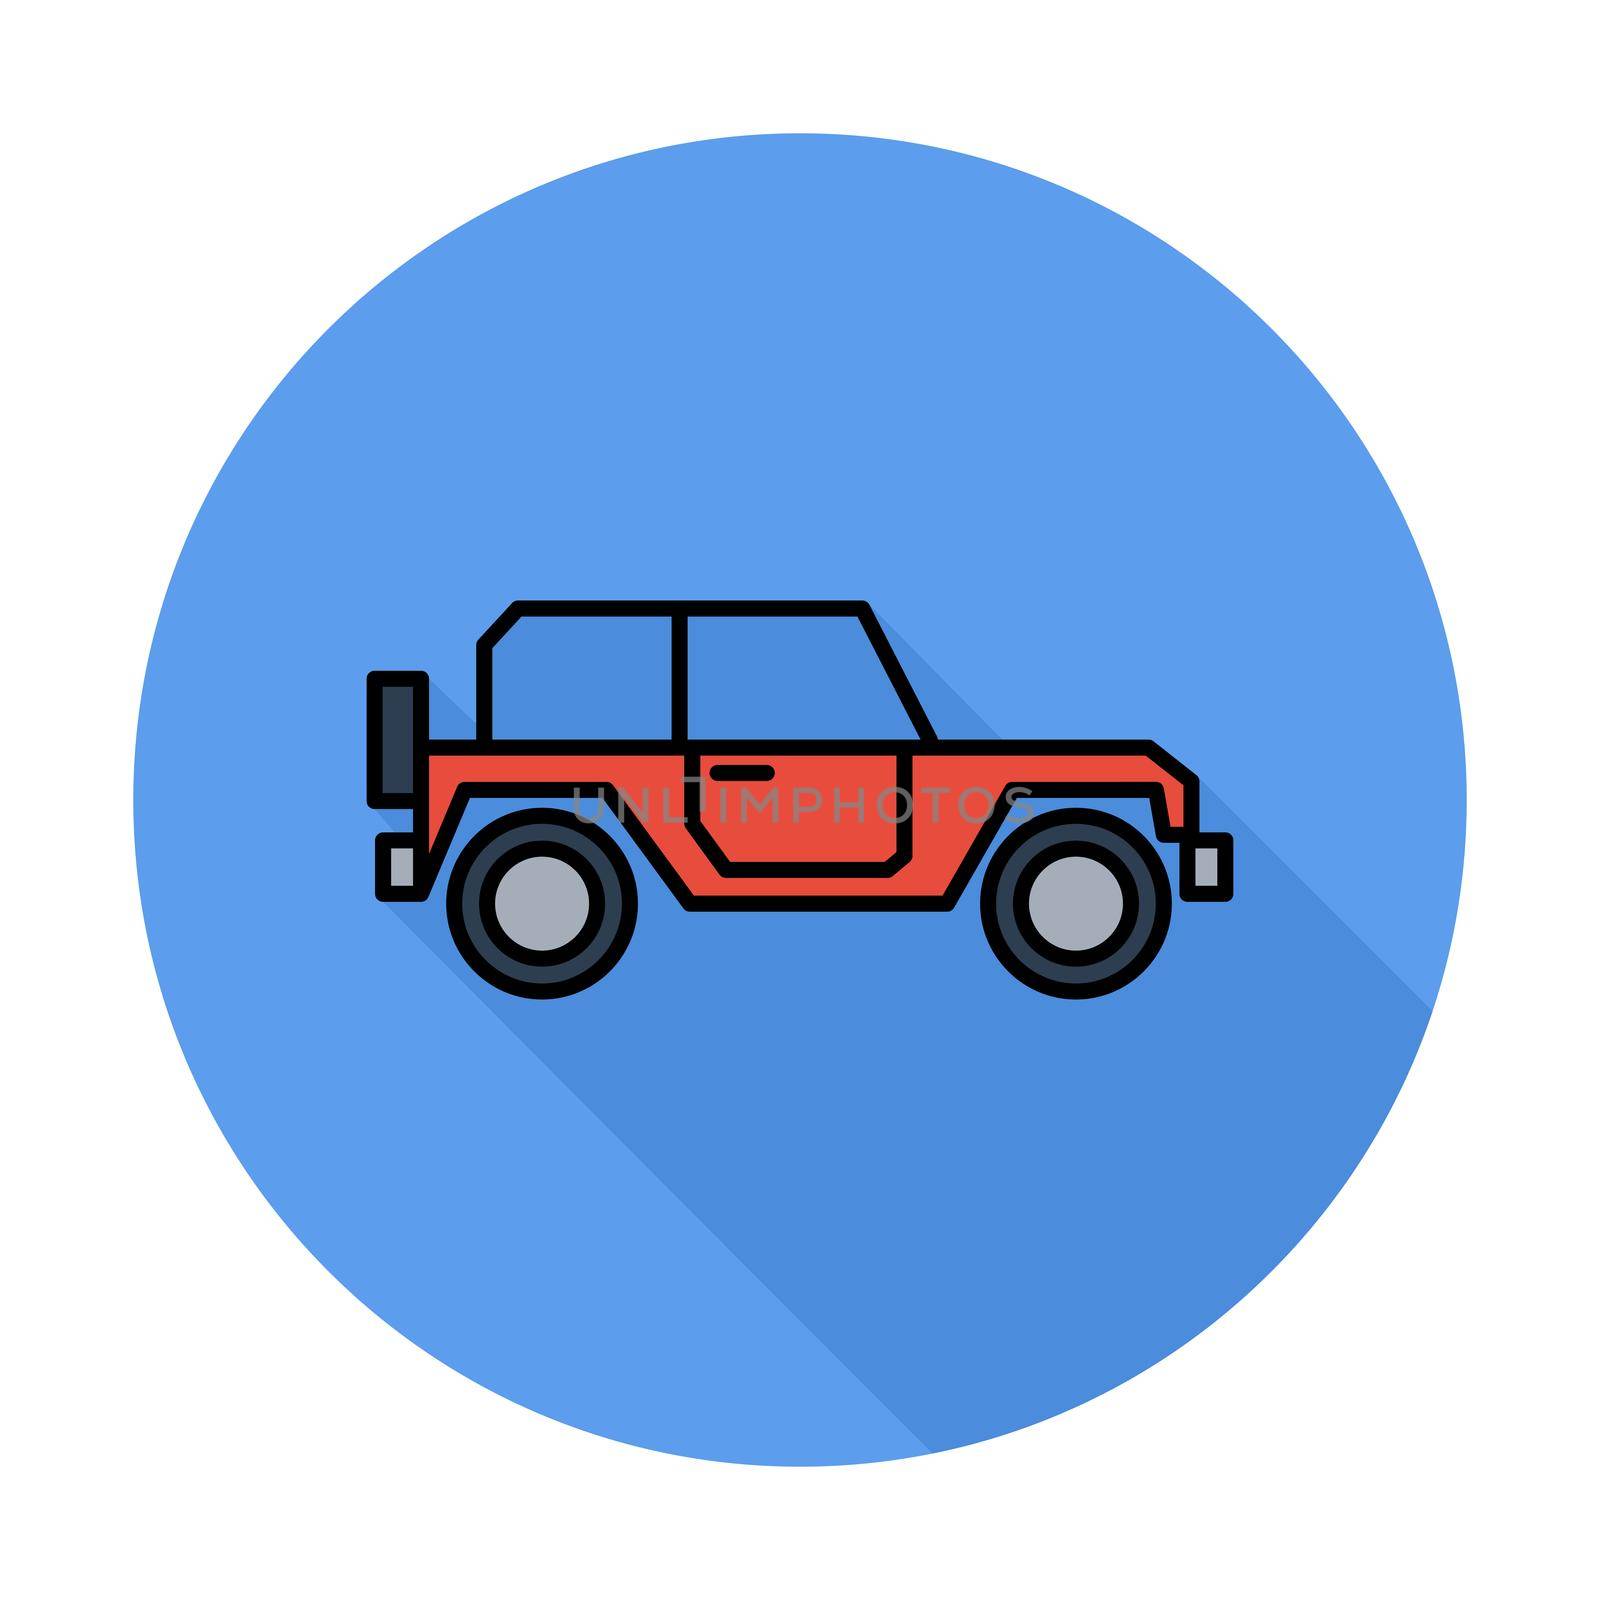 Offroad car. Single flat color icon on the circle. illustration.